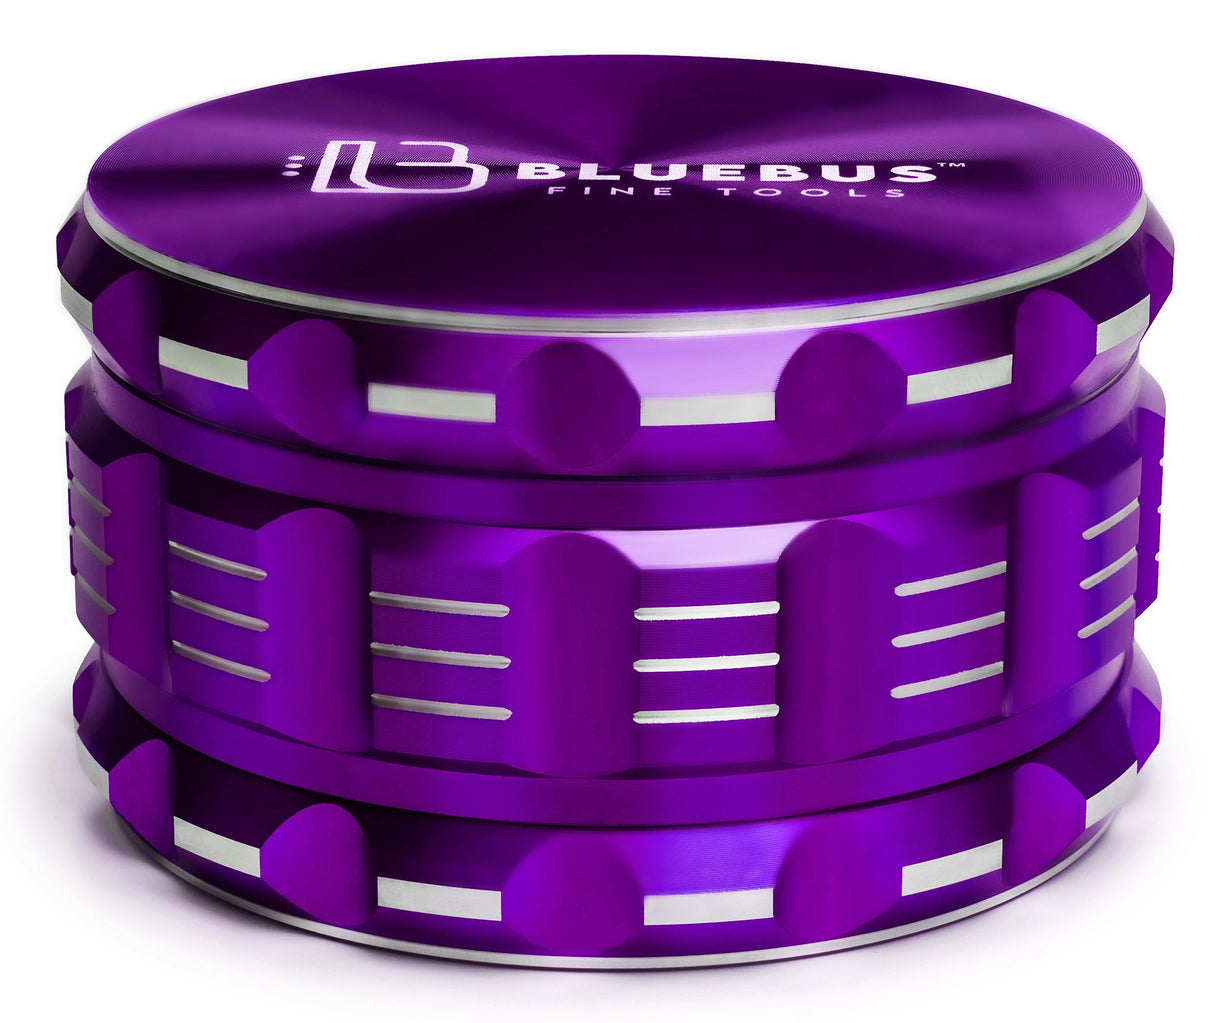 GA Aluminum Grinder by Blue Bus Fine Tools in Purple, 3.5" 4-Part Design, Isolated on White